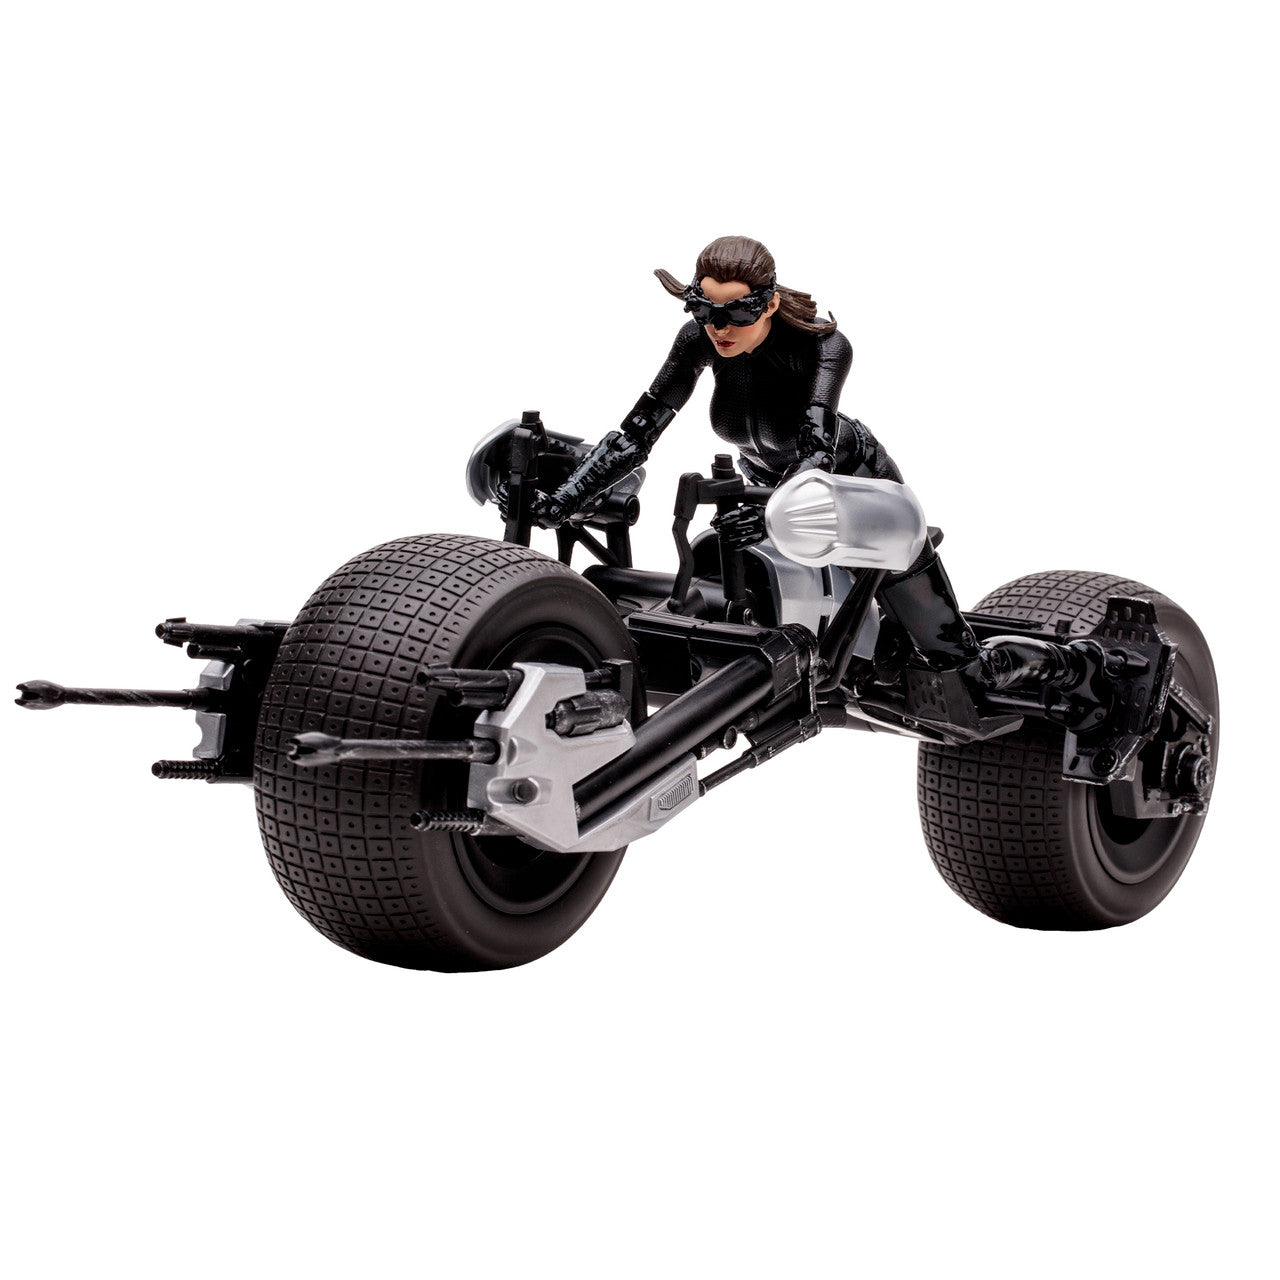 Catwoman and Batpod (The Dark Knight Rises) Figure and Vehicle